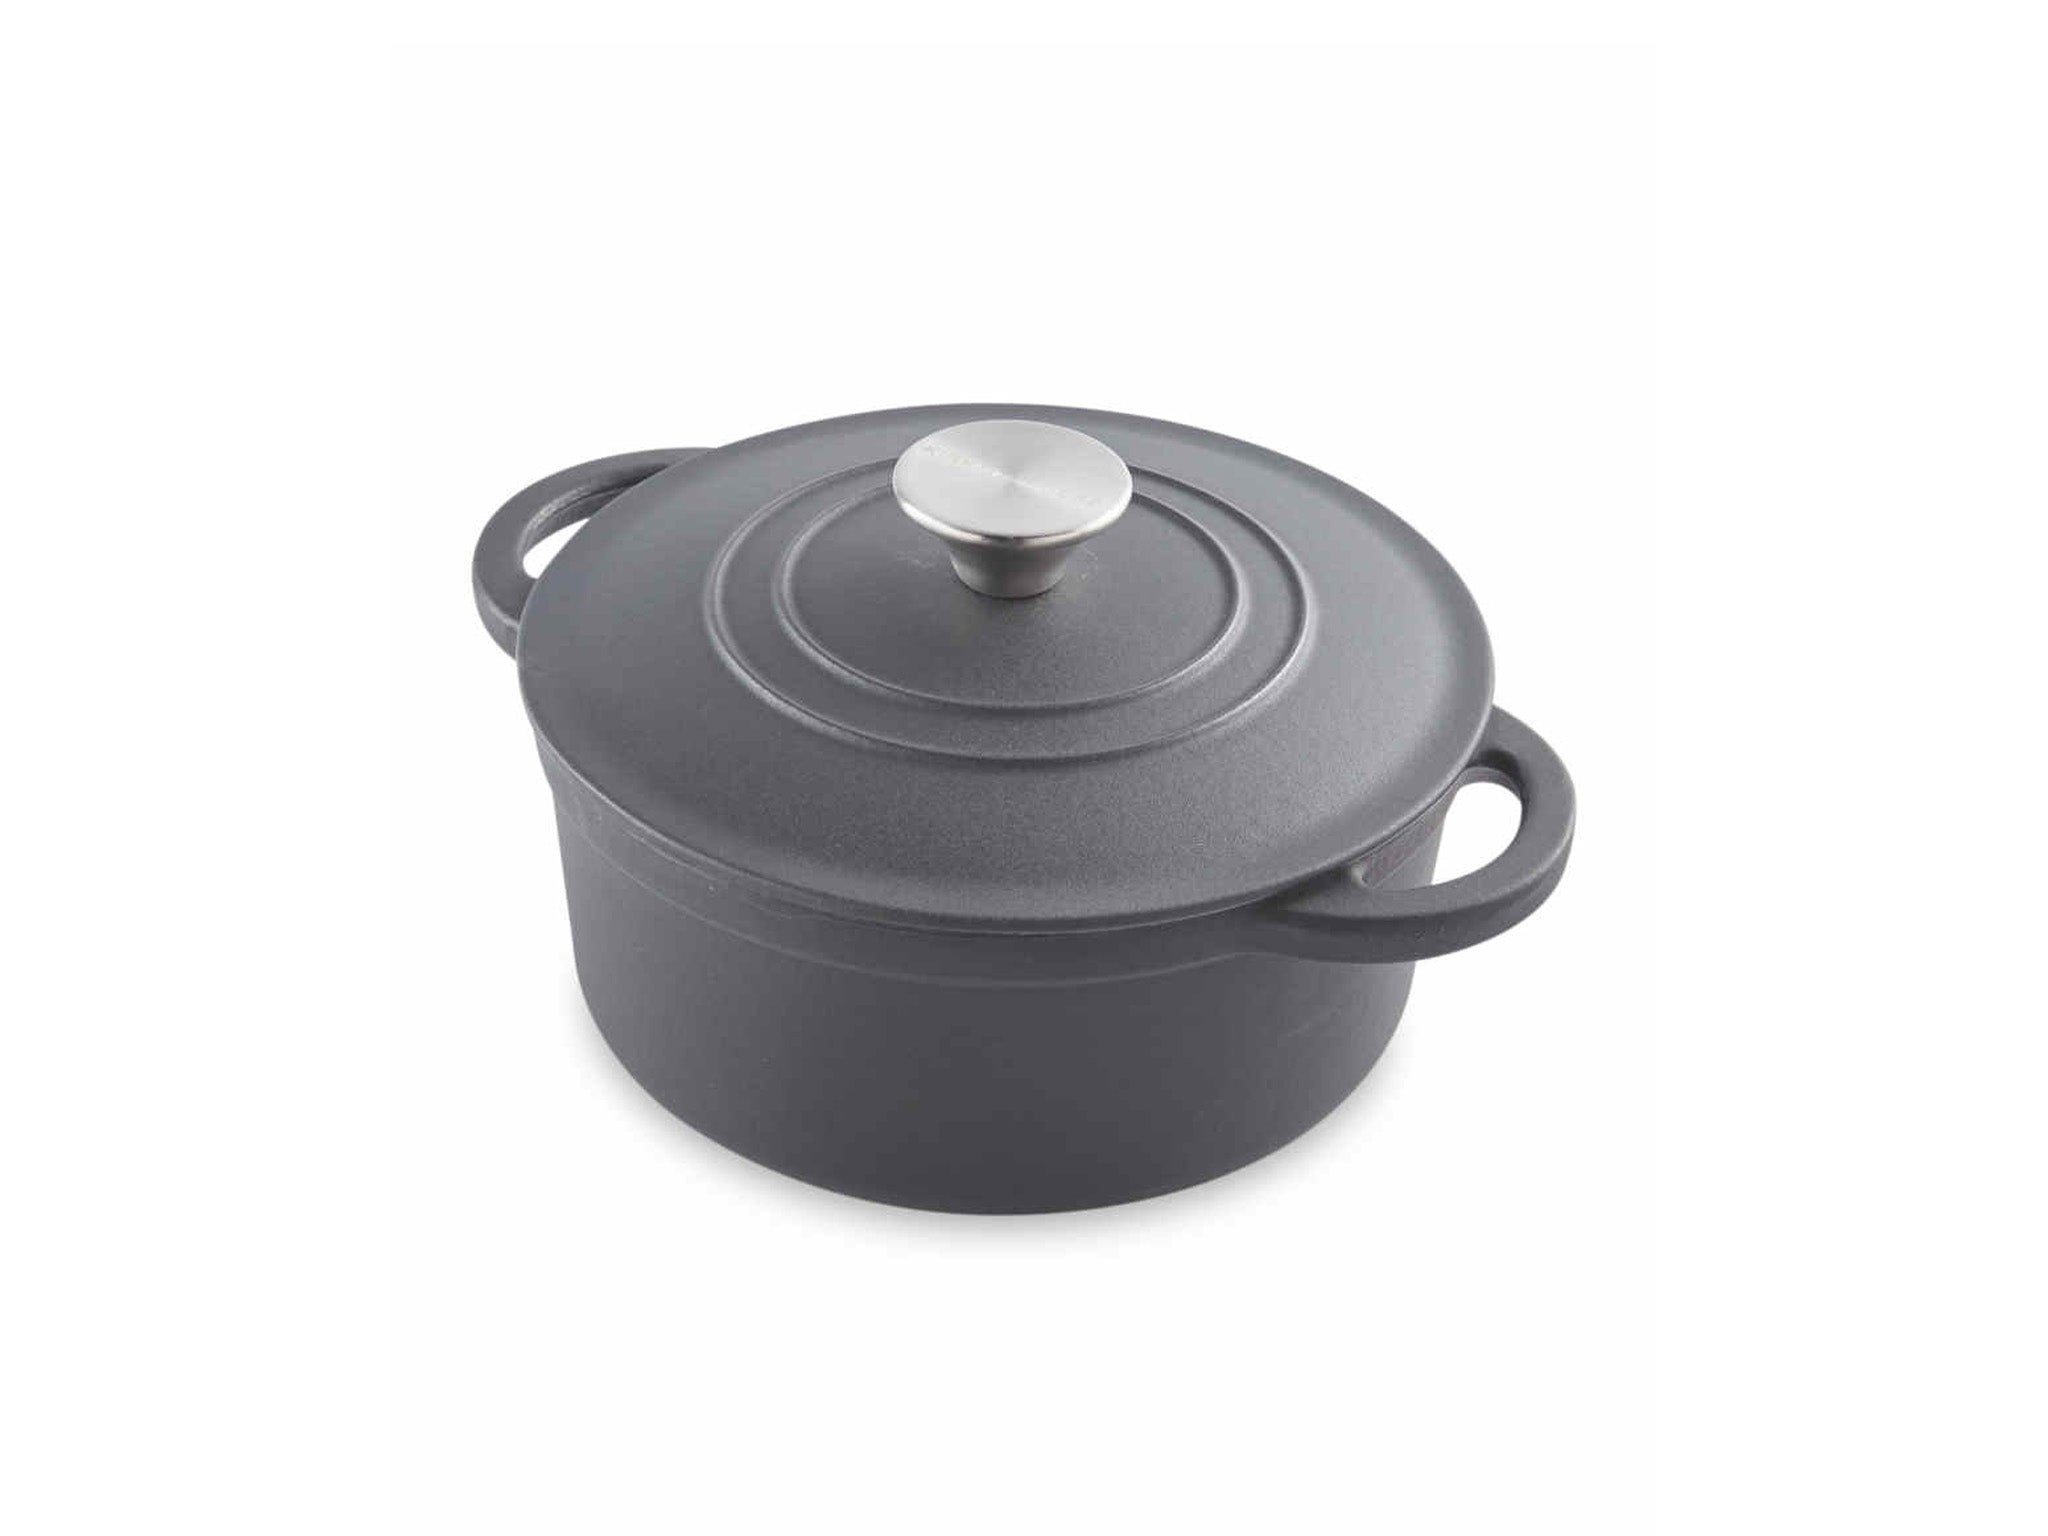 ALDI set to bring back its popular Crofton cast iron range that's 'just as  good' as Le Creuset Dutch oven